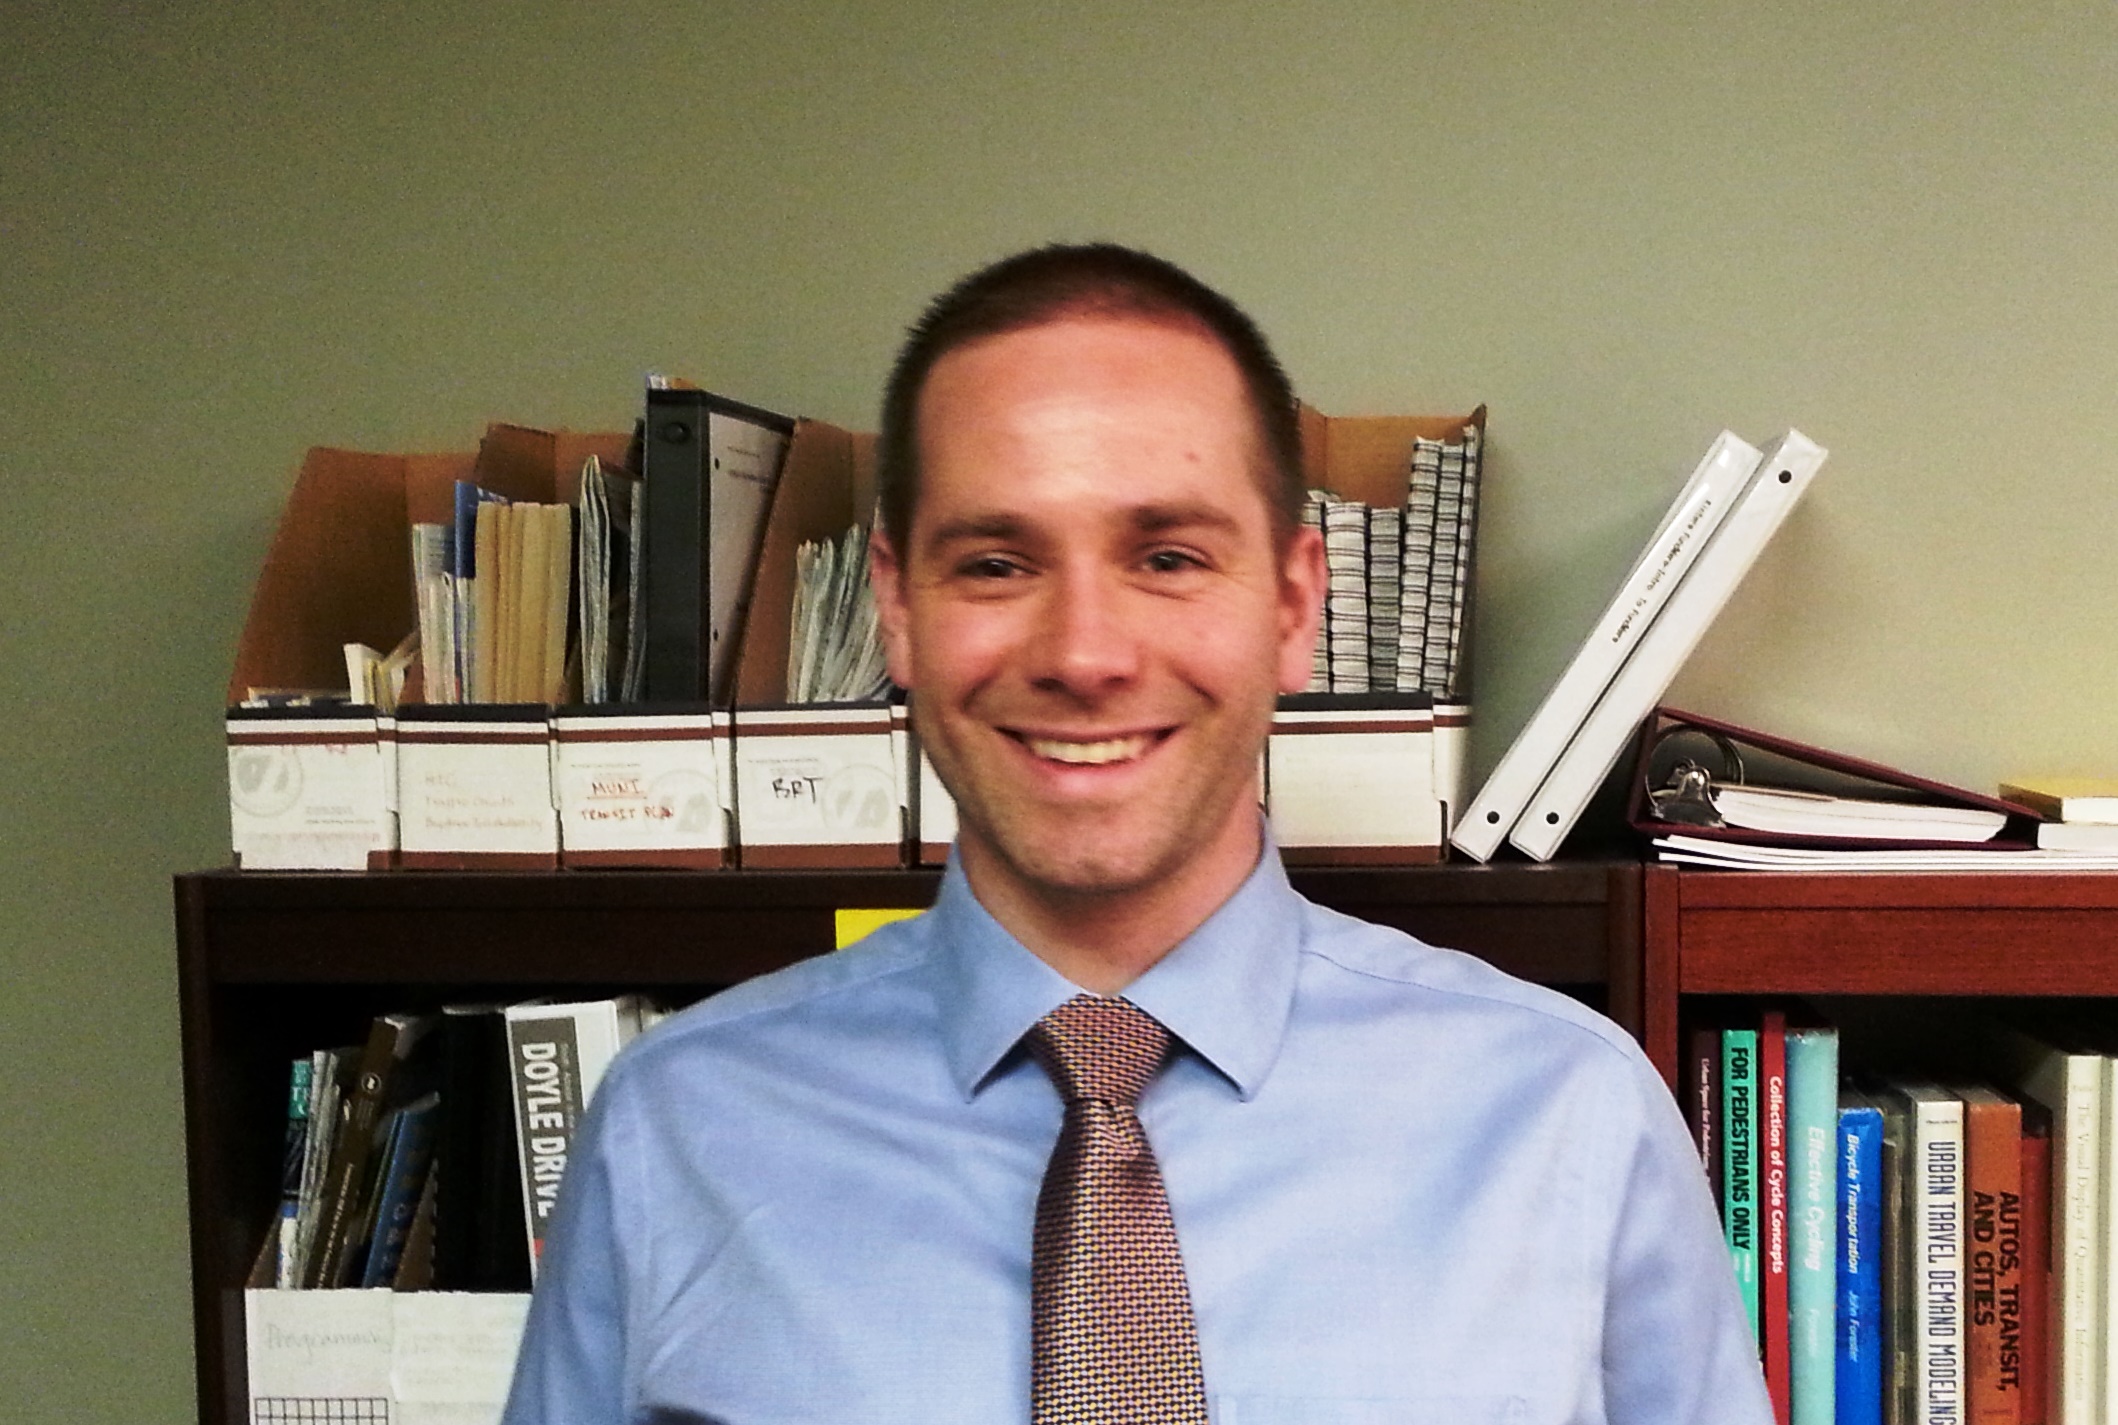 Daniel Tischler is a Transportation Planner with the San Francisco County Transportation Authority